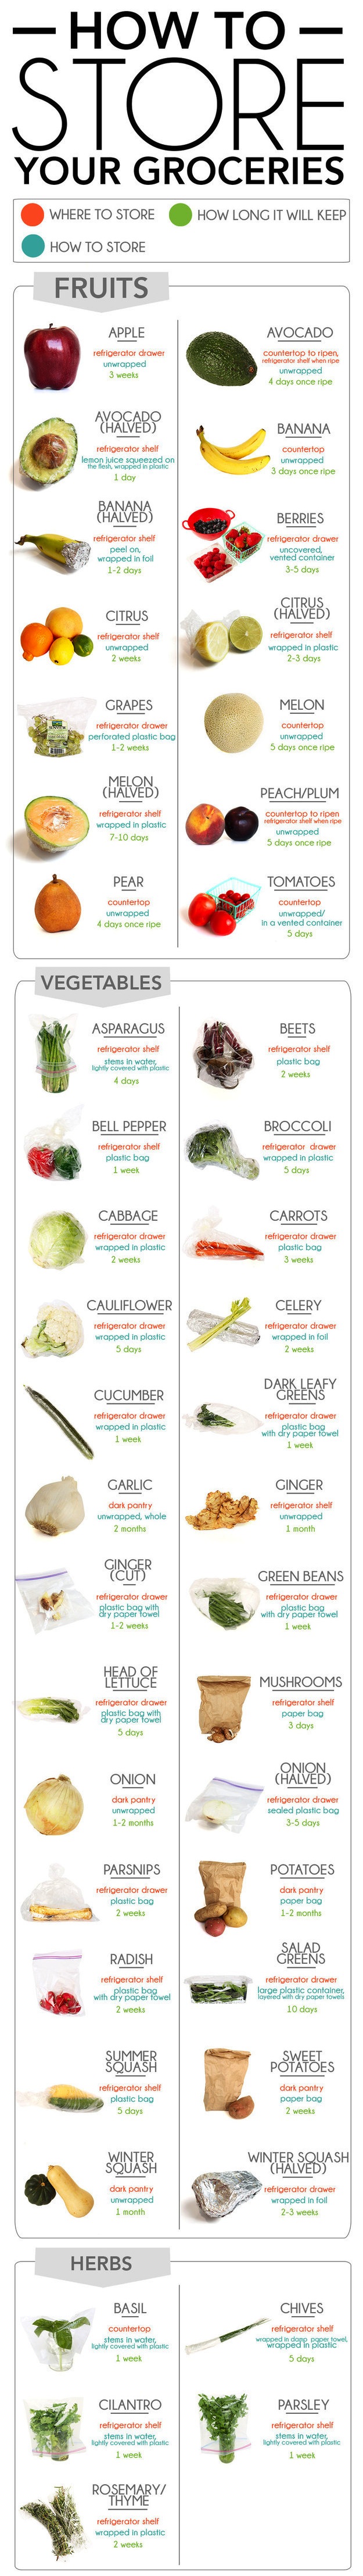 Handy Instructions To Storing Your Groceries Infographic